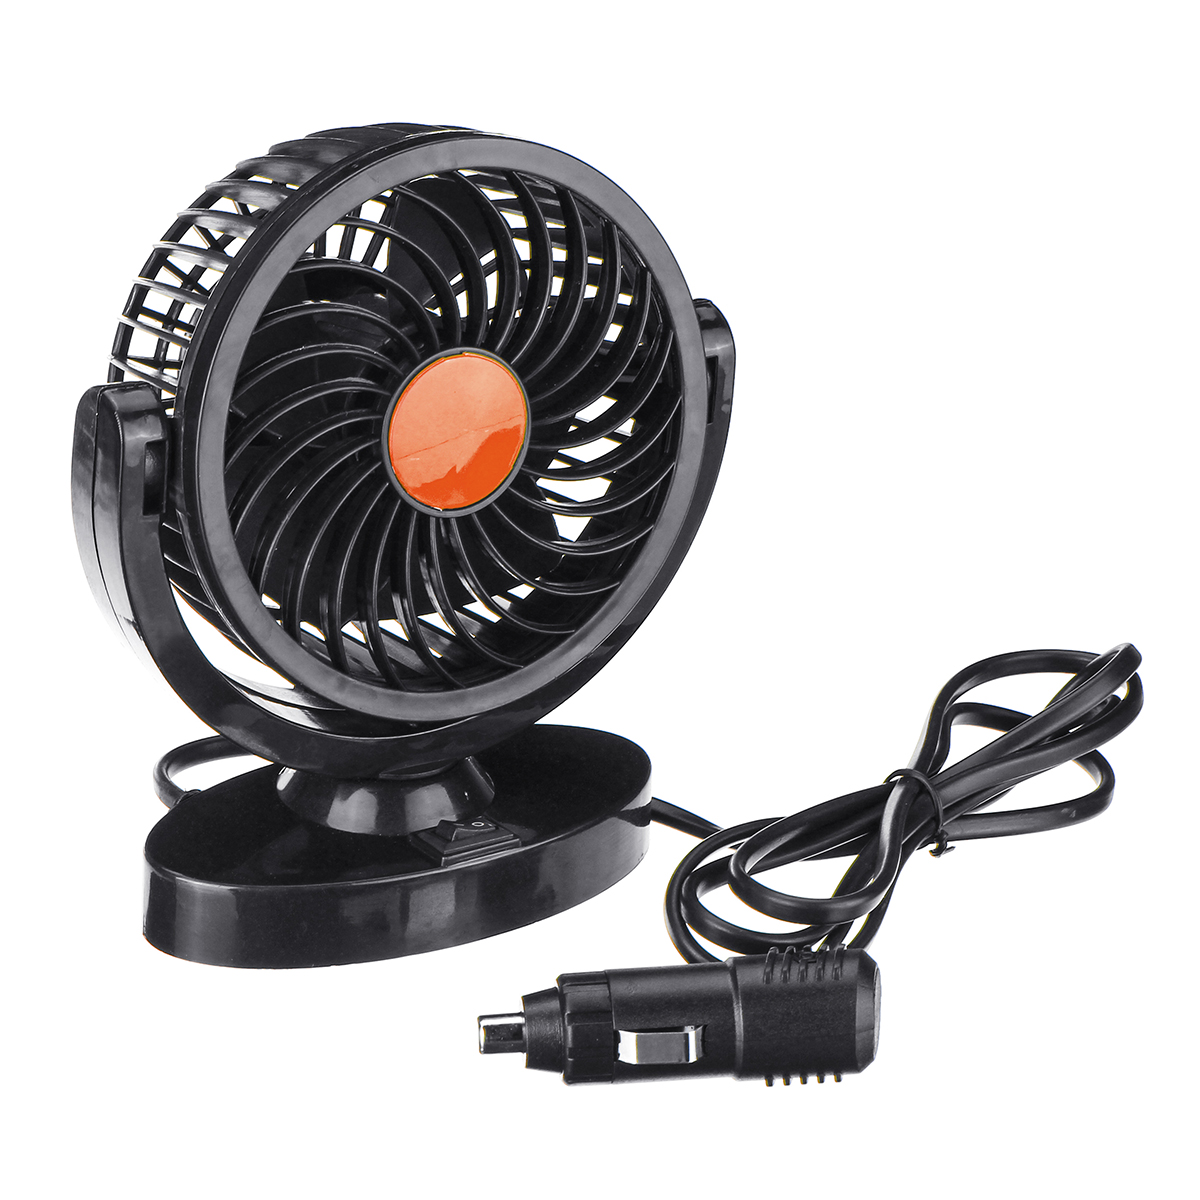 DC-12V24V-360deg-All-Round-Mini-Auto-Air-Cooling-Fan-Adjustable-Low-Noise-1466573-4